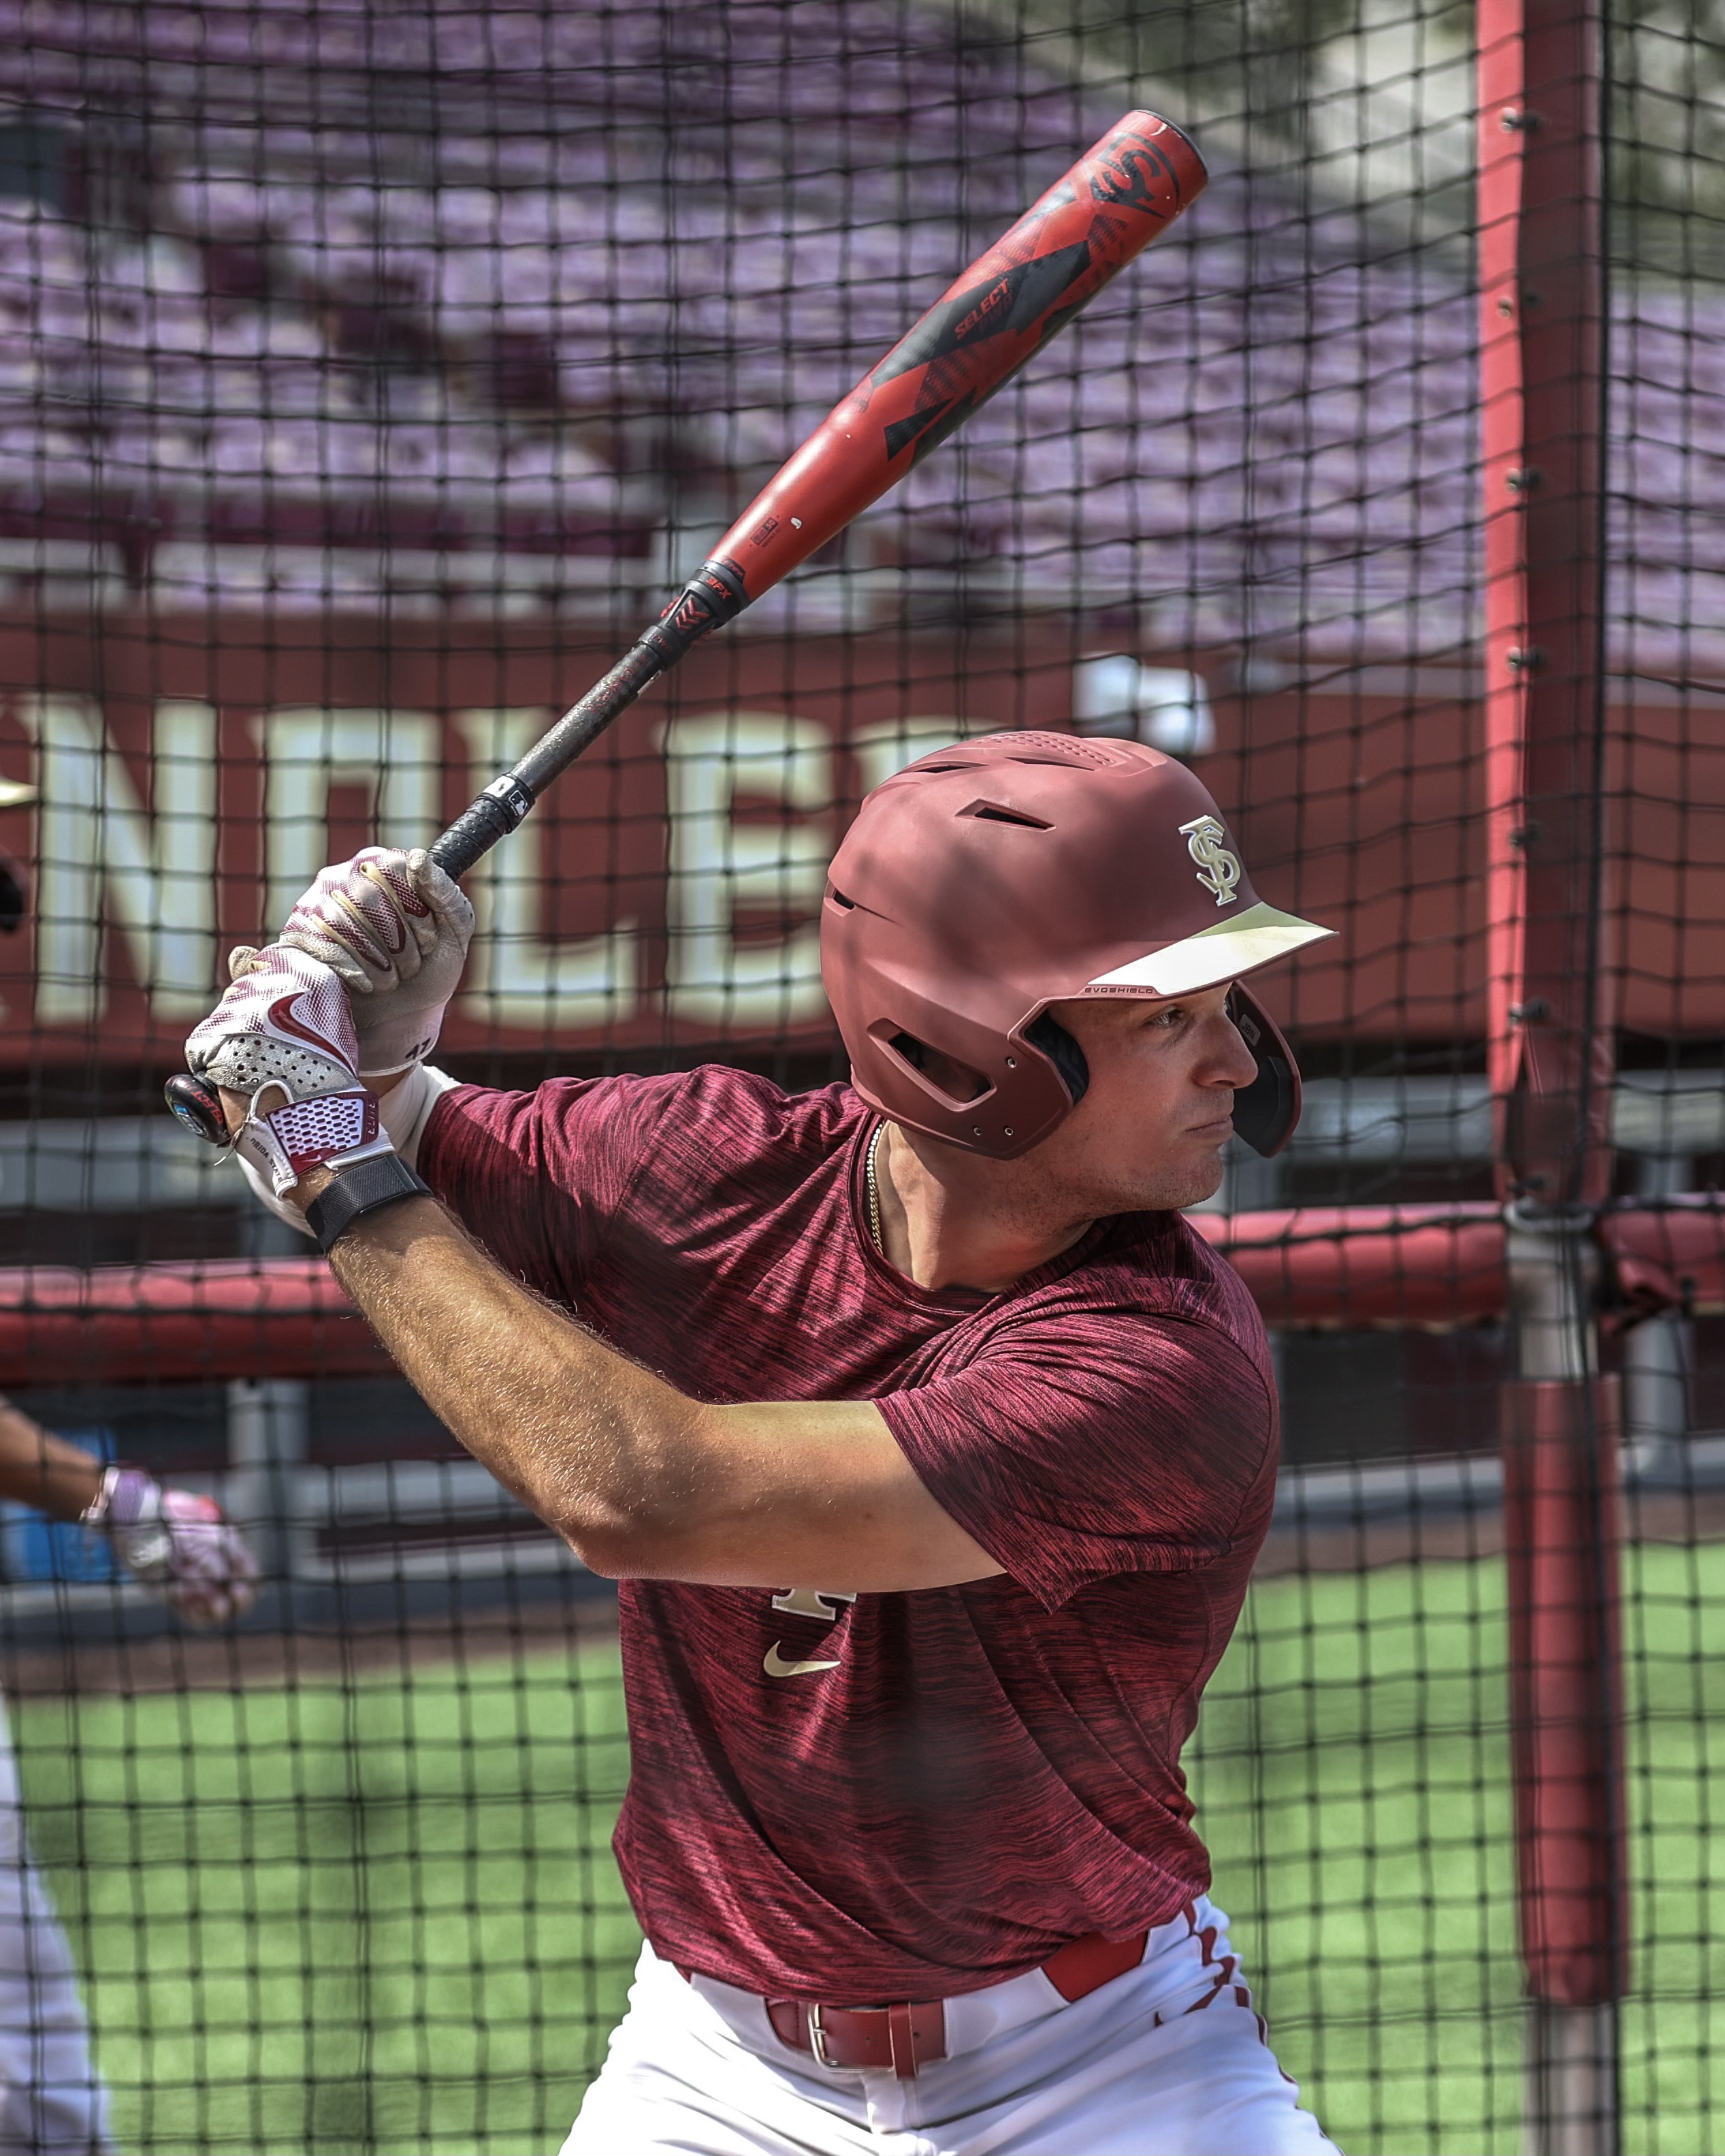 FSU Baseball on X: We'll be unveiling the new Florida State